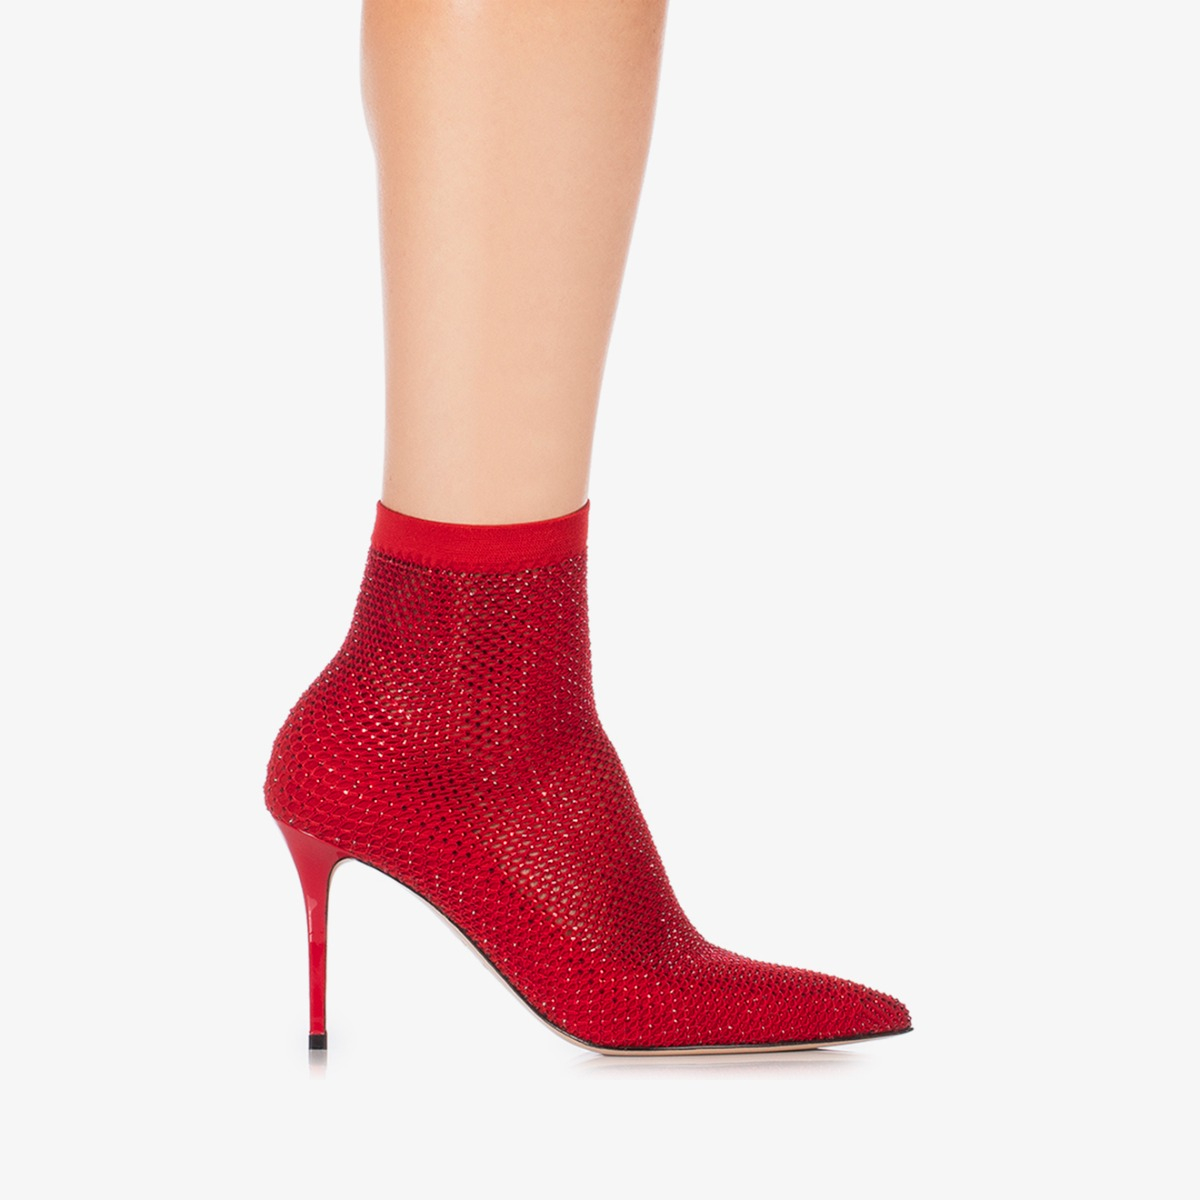 GILDA ANKLE BOOT 90 mm - Le Silla official outlet